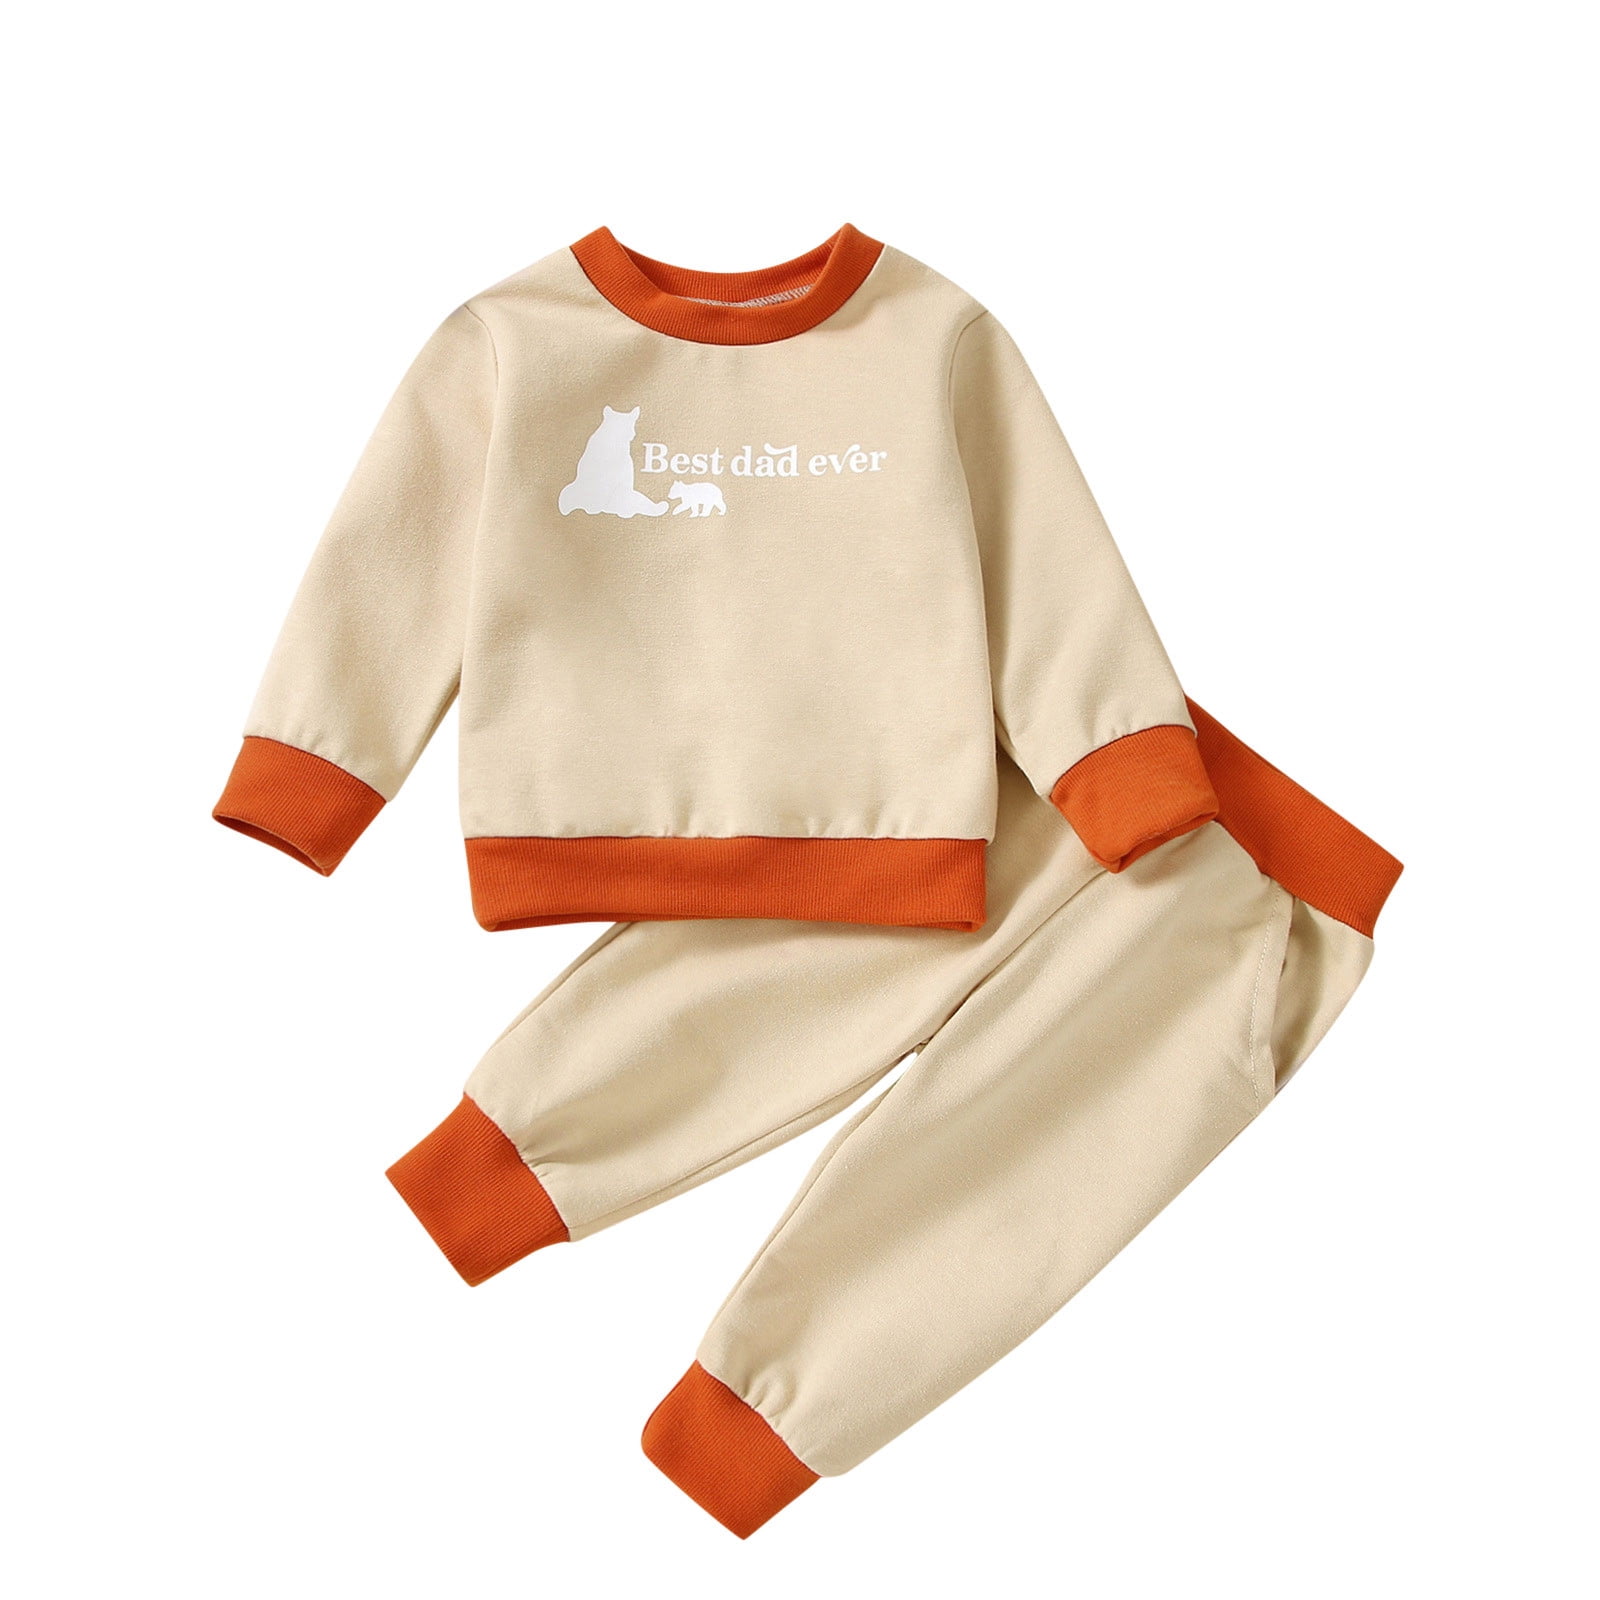 Newborn Infant Baby Cartoon Animal Striped Clothes,Fall Girl Boy Long Sleeve Tops+Pants 2Pcs Outfits Set 